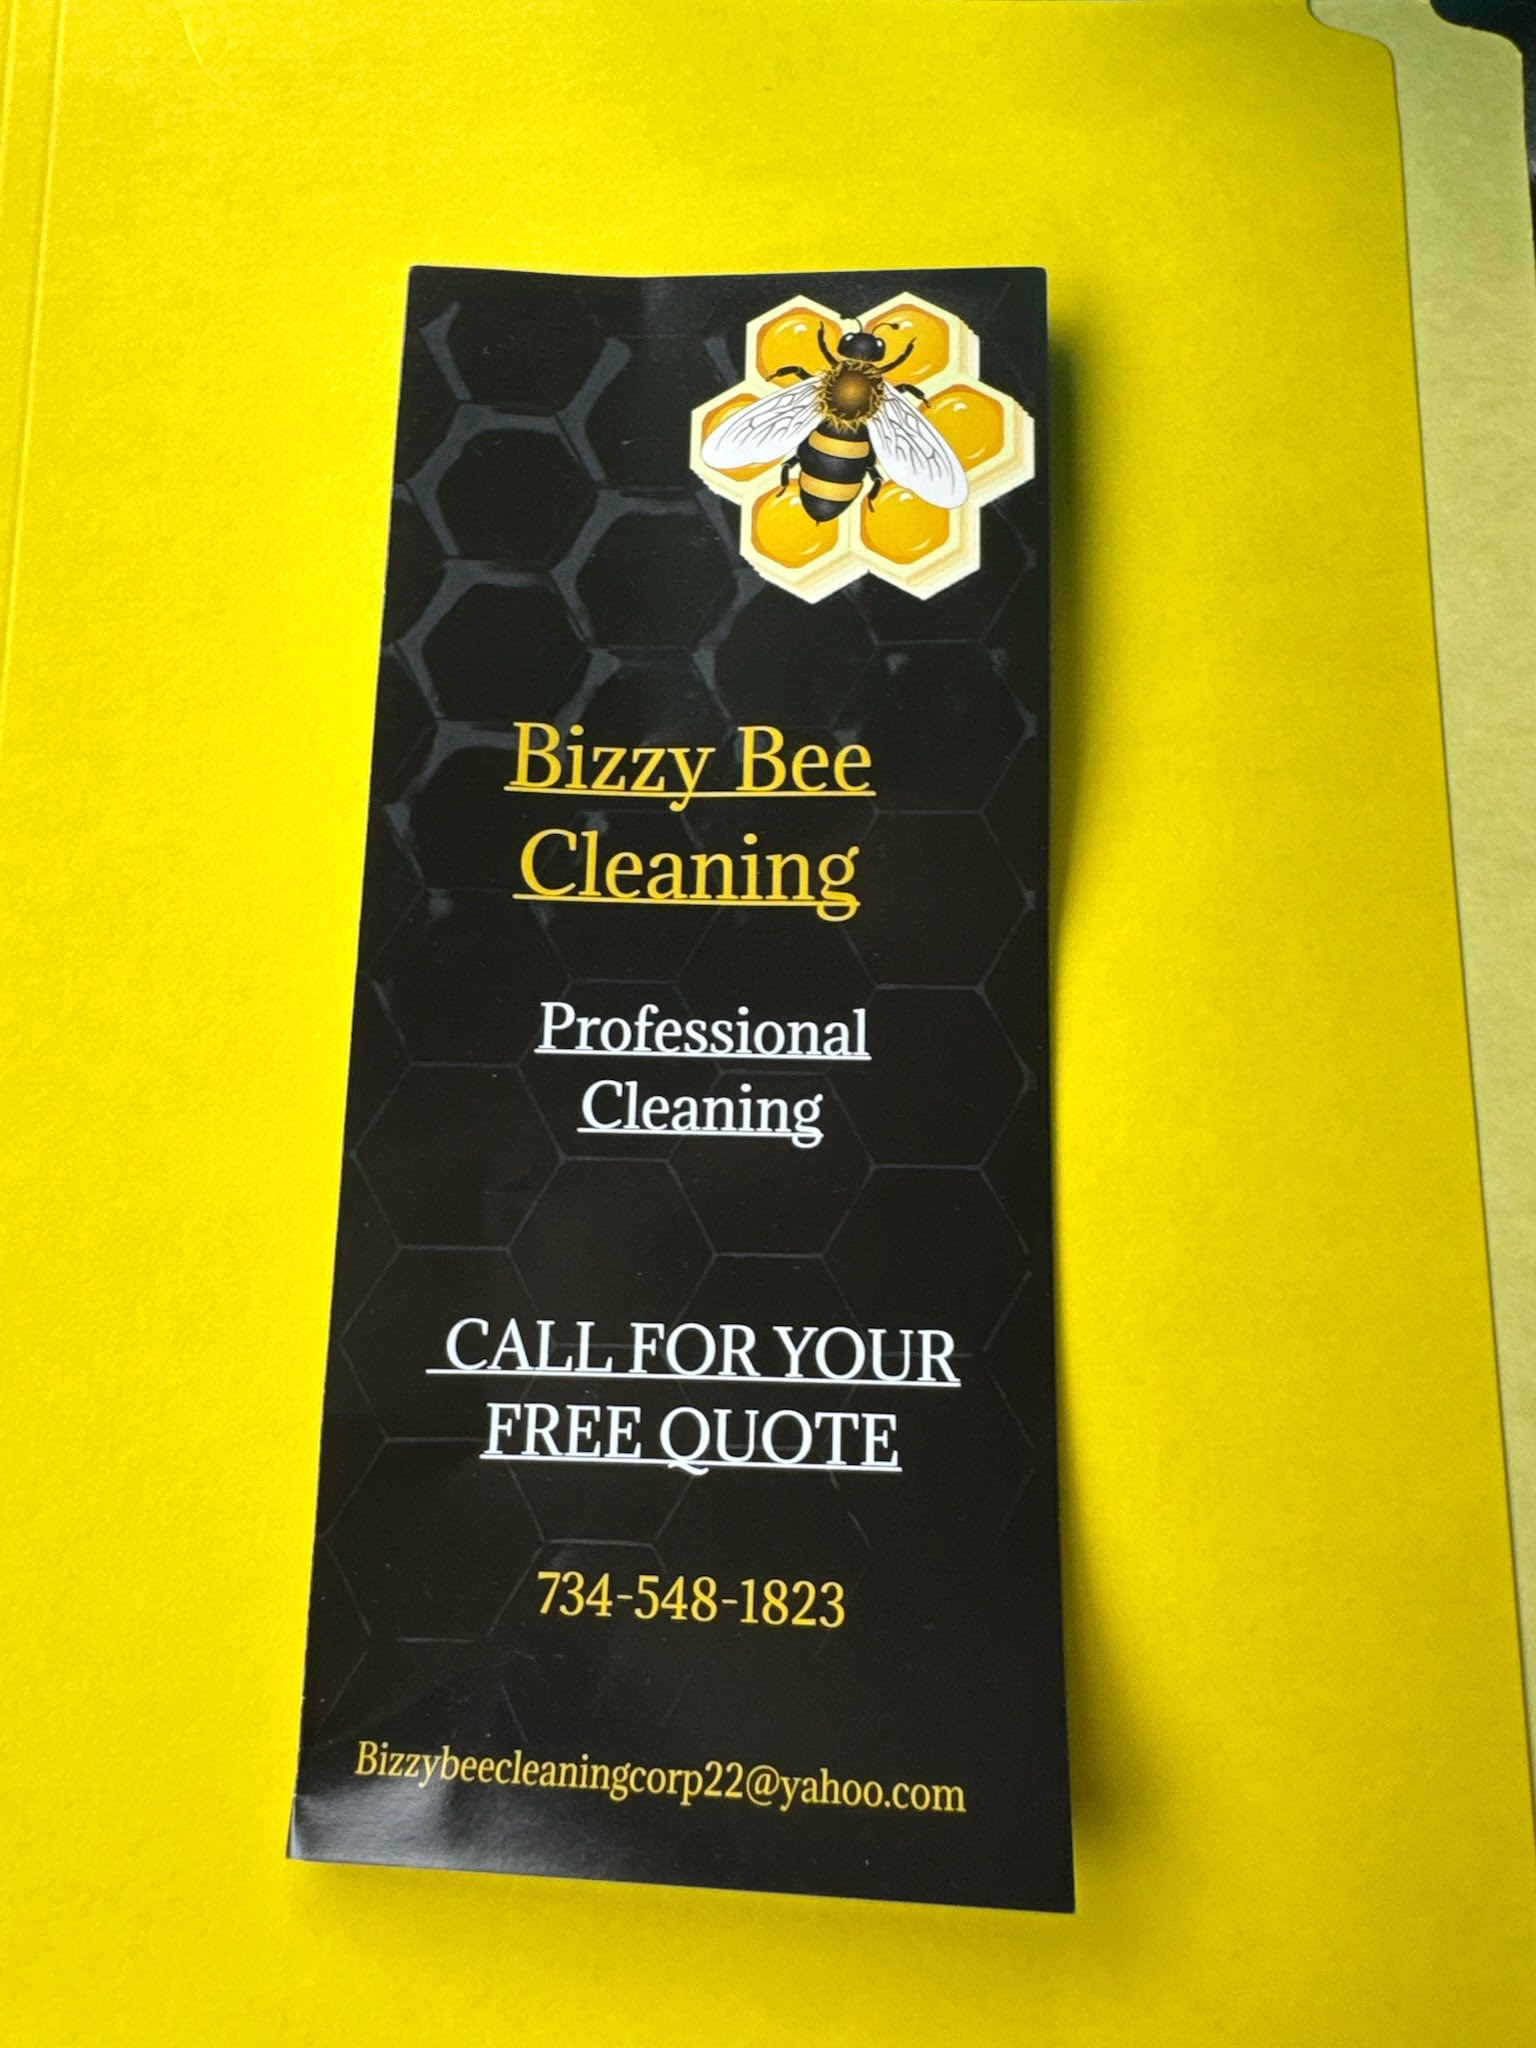 Bizzy Bee Cleaning Logo